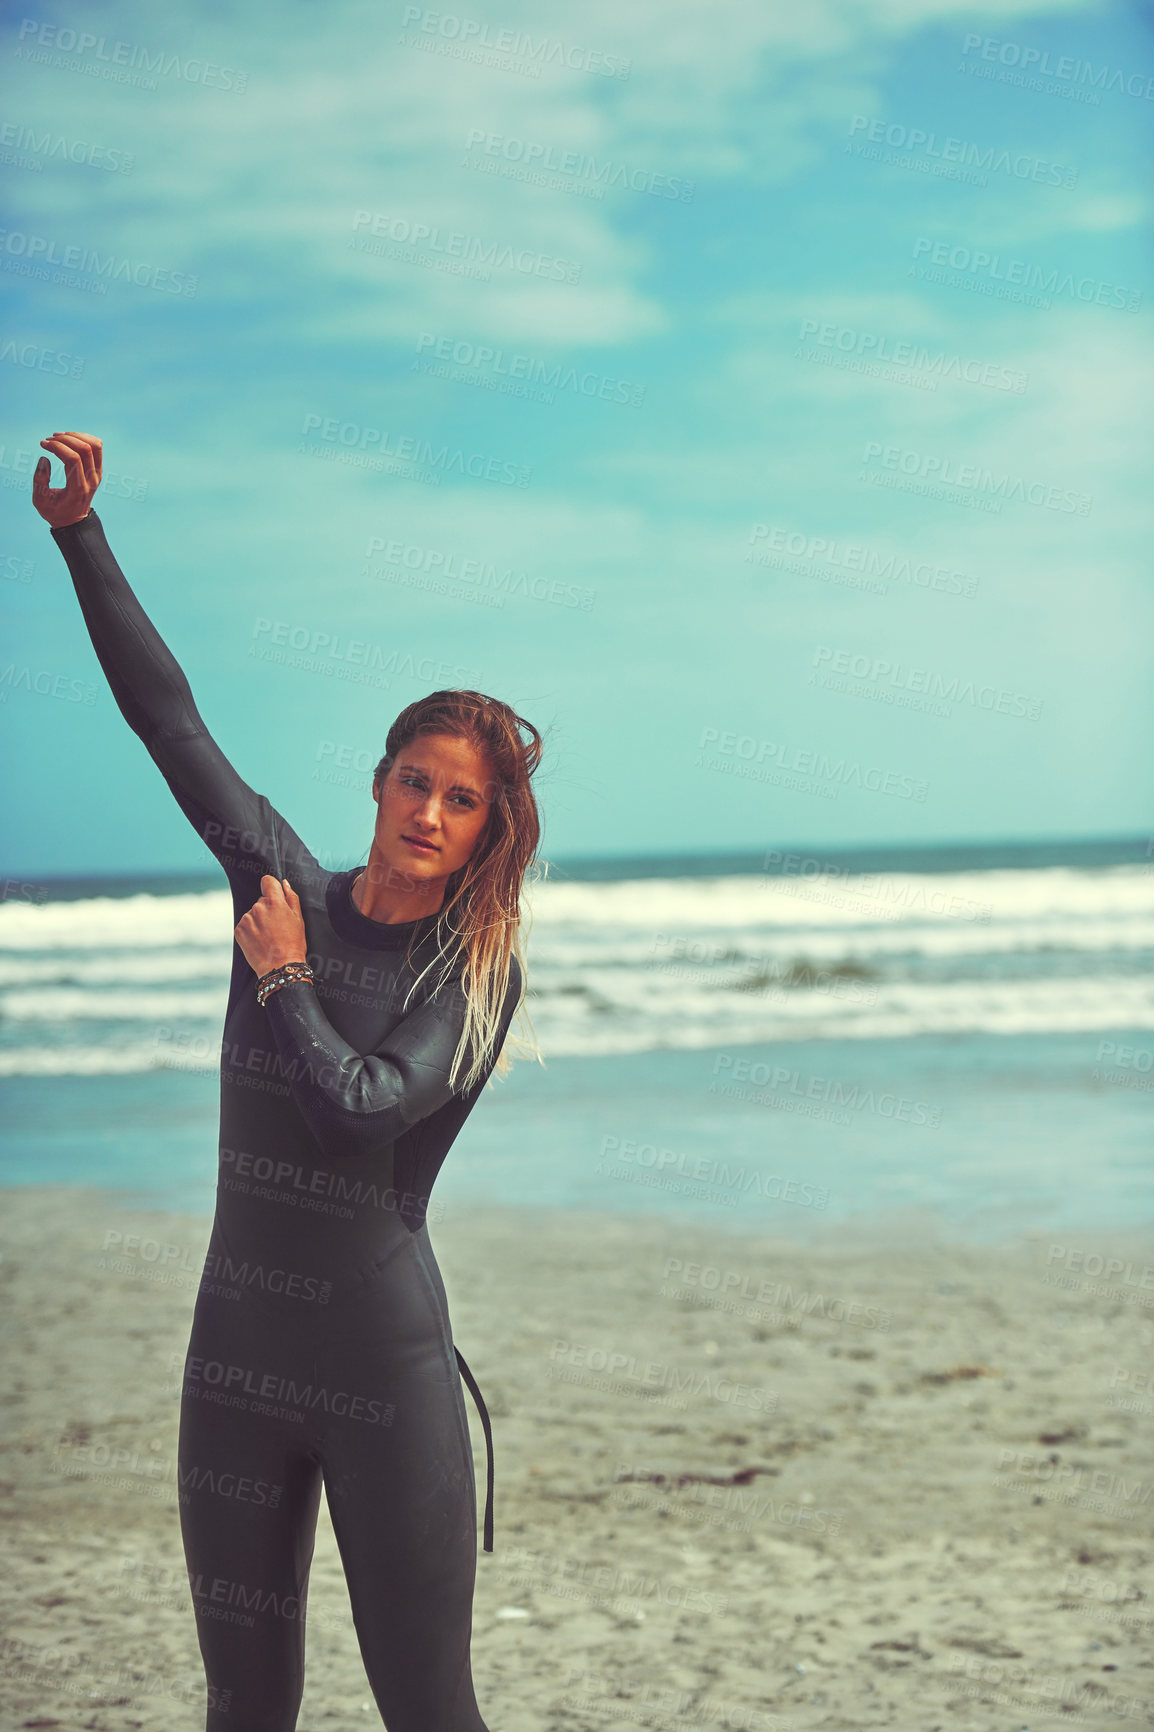 Buy stock photo Shot of a beautiful young woman going for a surf at the beach